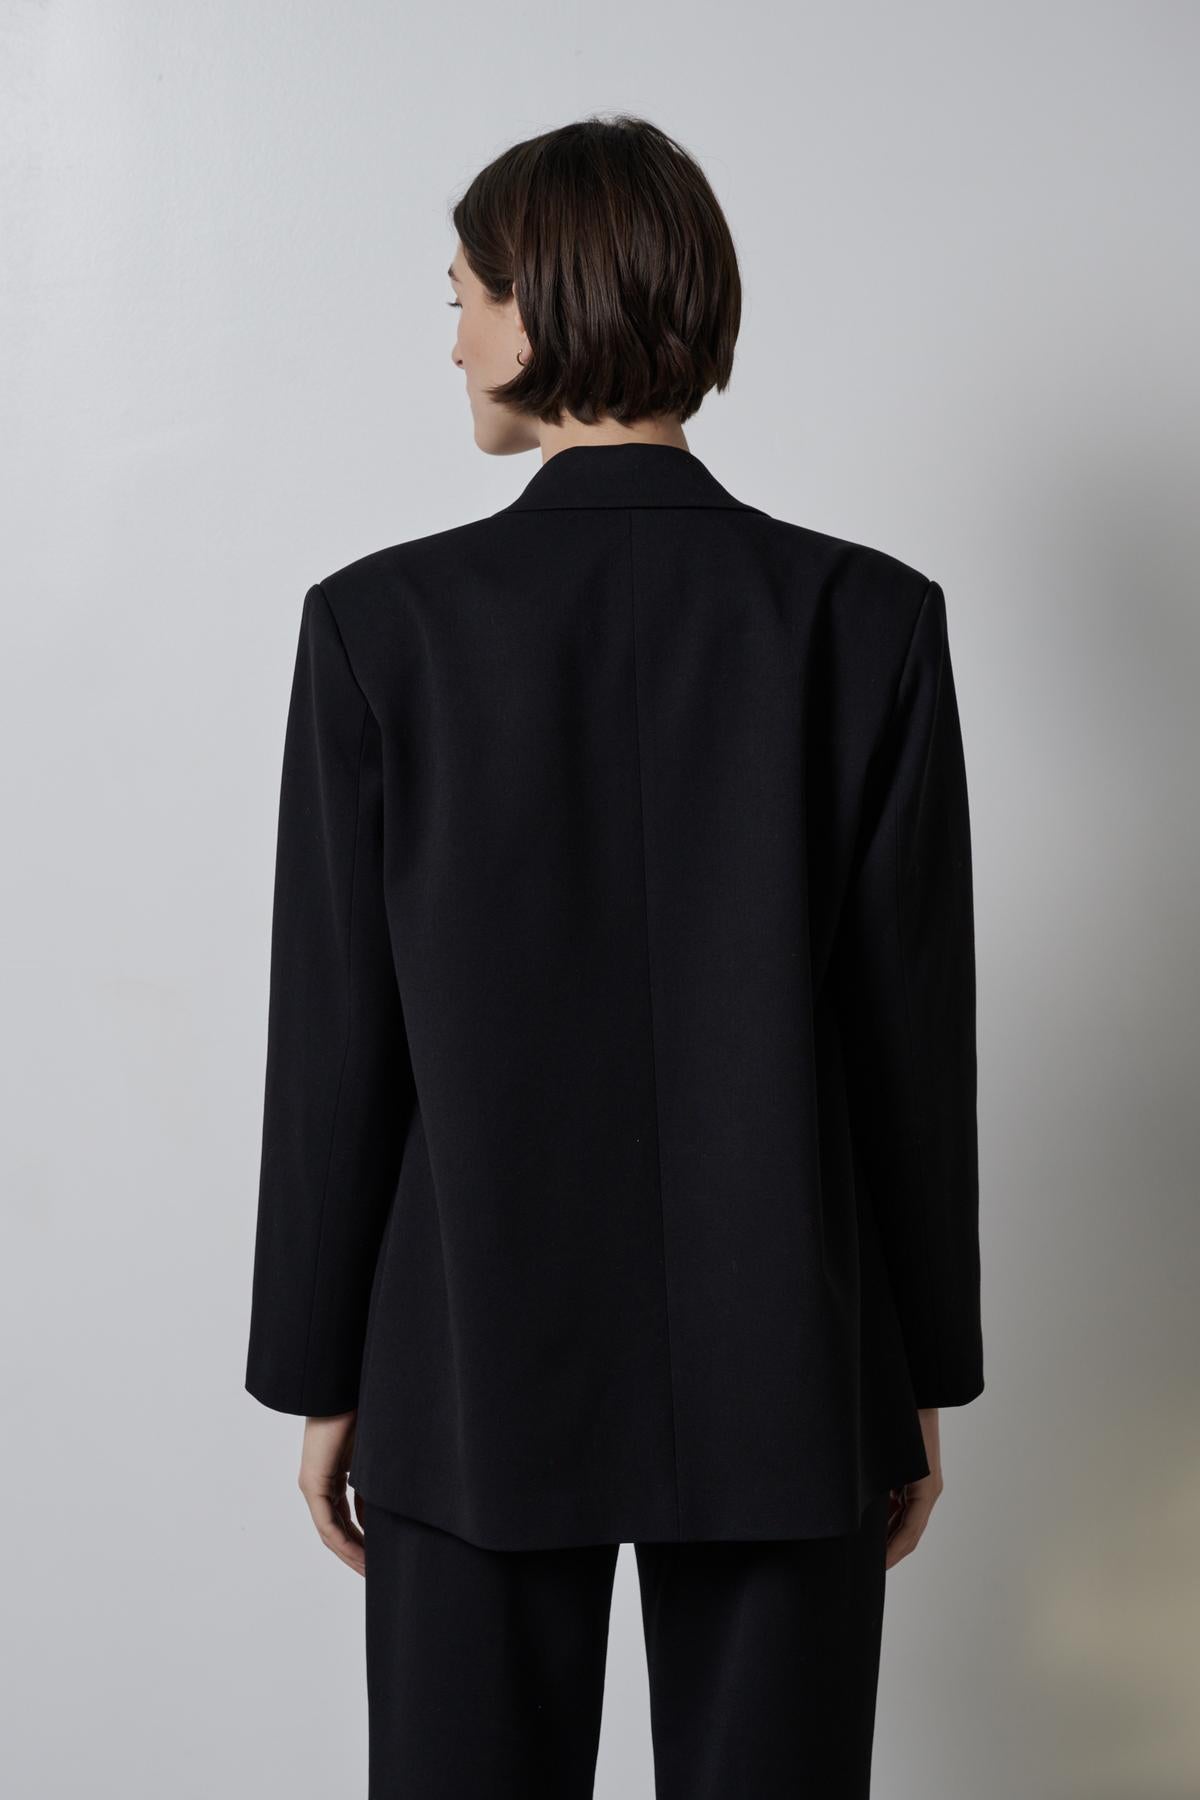 Woman standing with her back to the camera, wearing a black double-breasted Fairfax blazer with a straight-cut silhouette from Velvet by Jenny Graham.-35995793883329